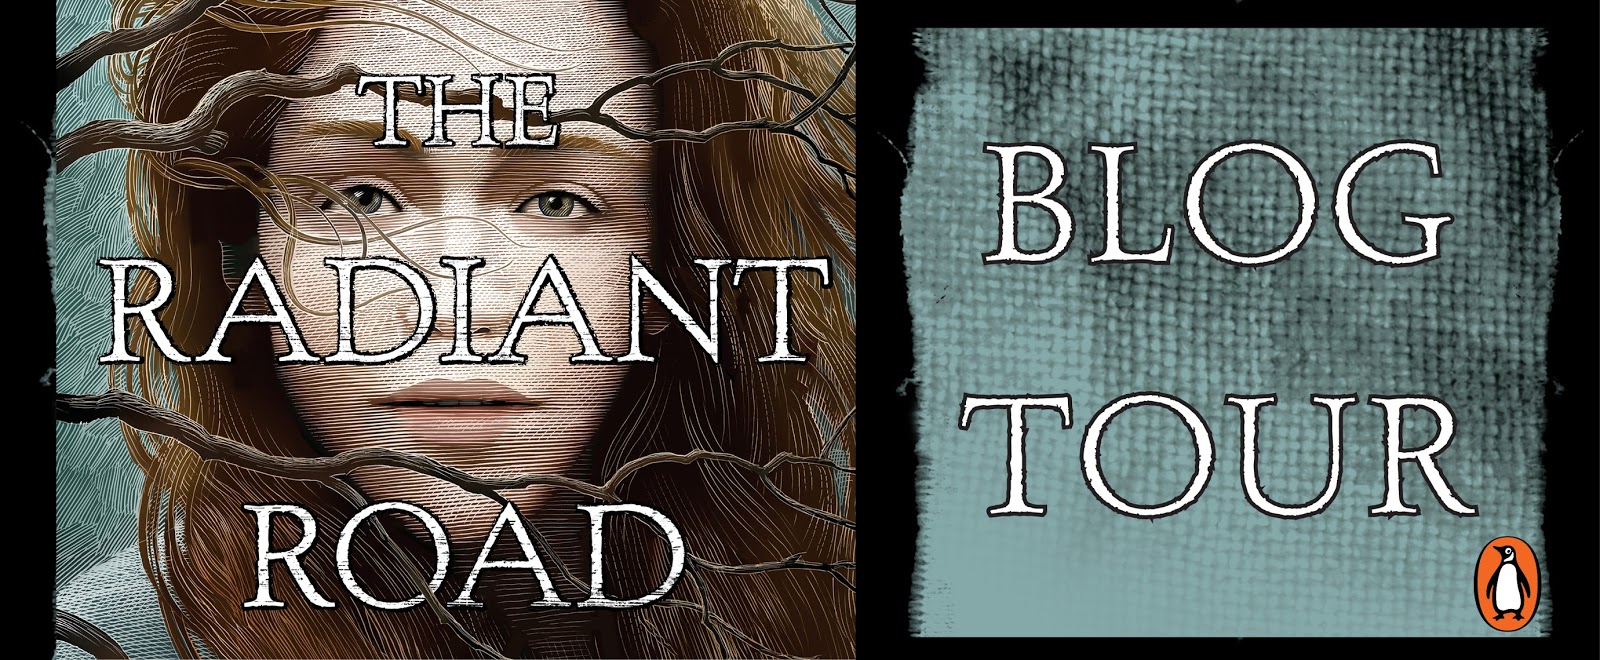 The Radiant Road Blog Tour: Katherine Catmull's Writing Inspirations